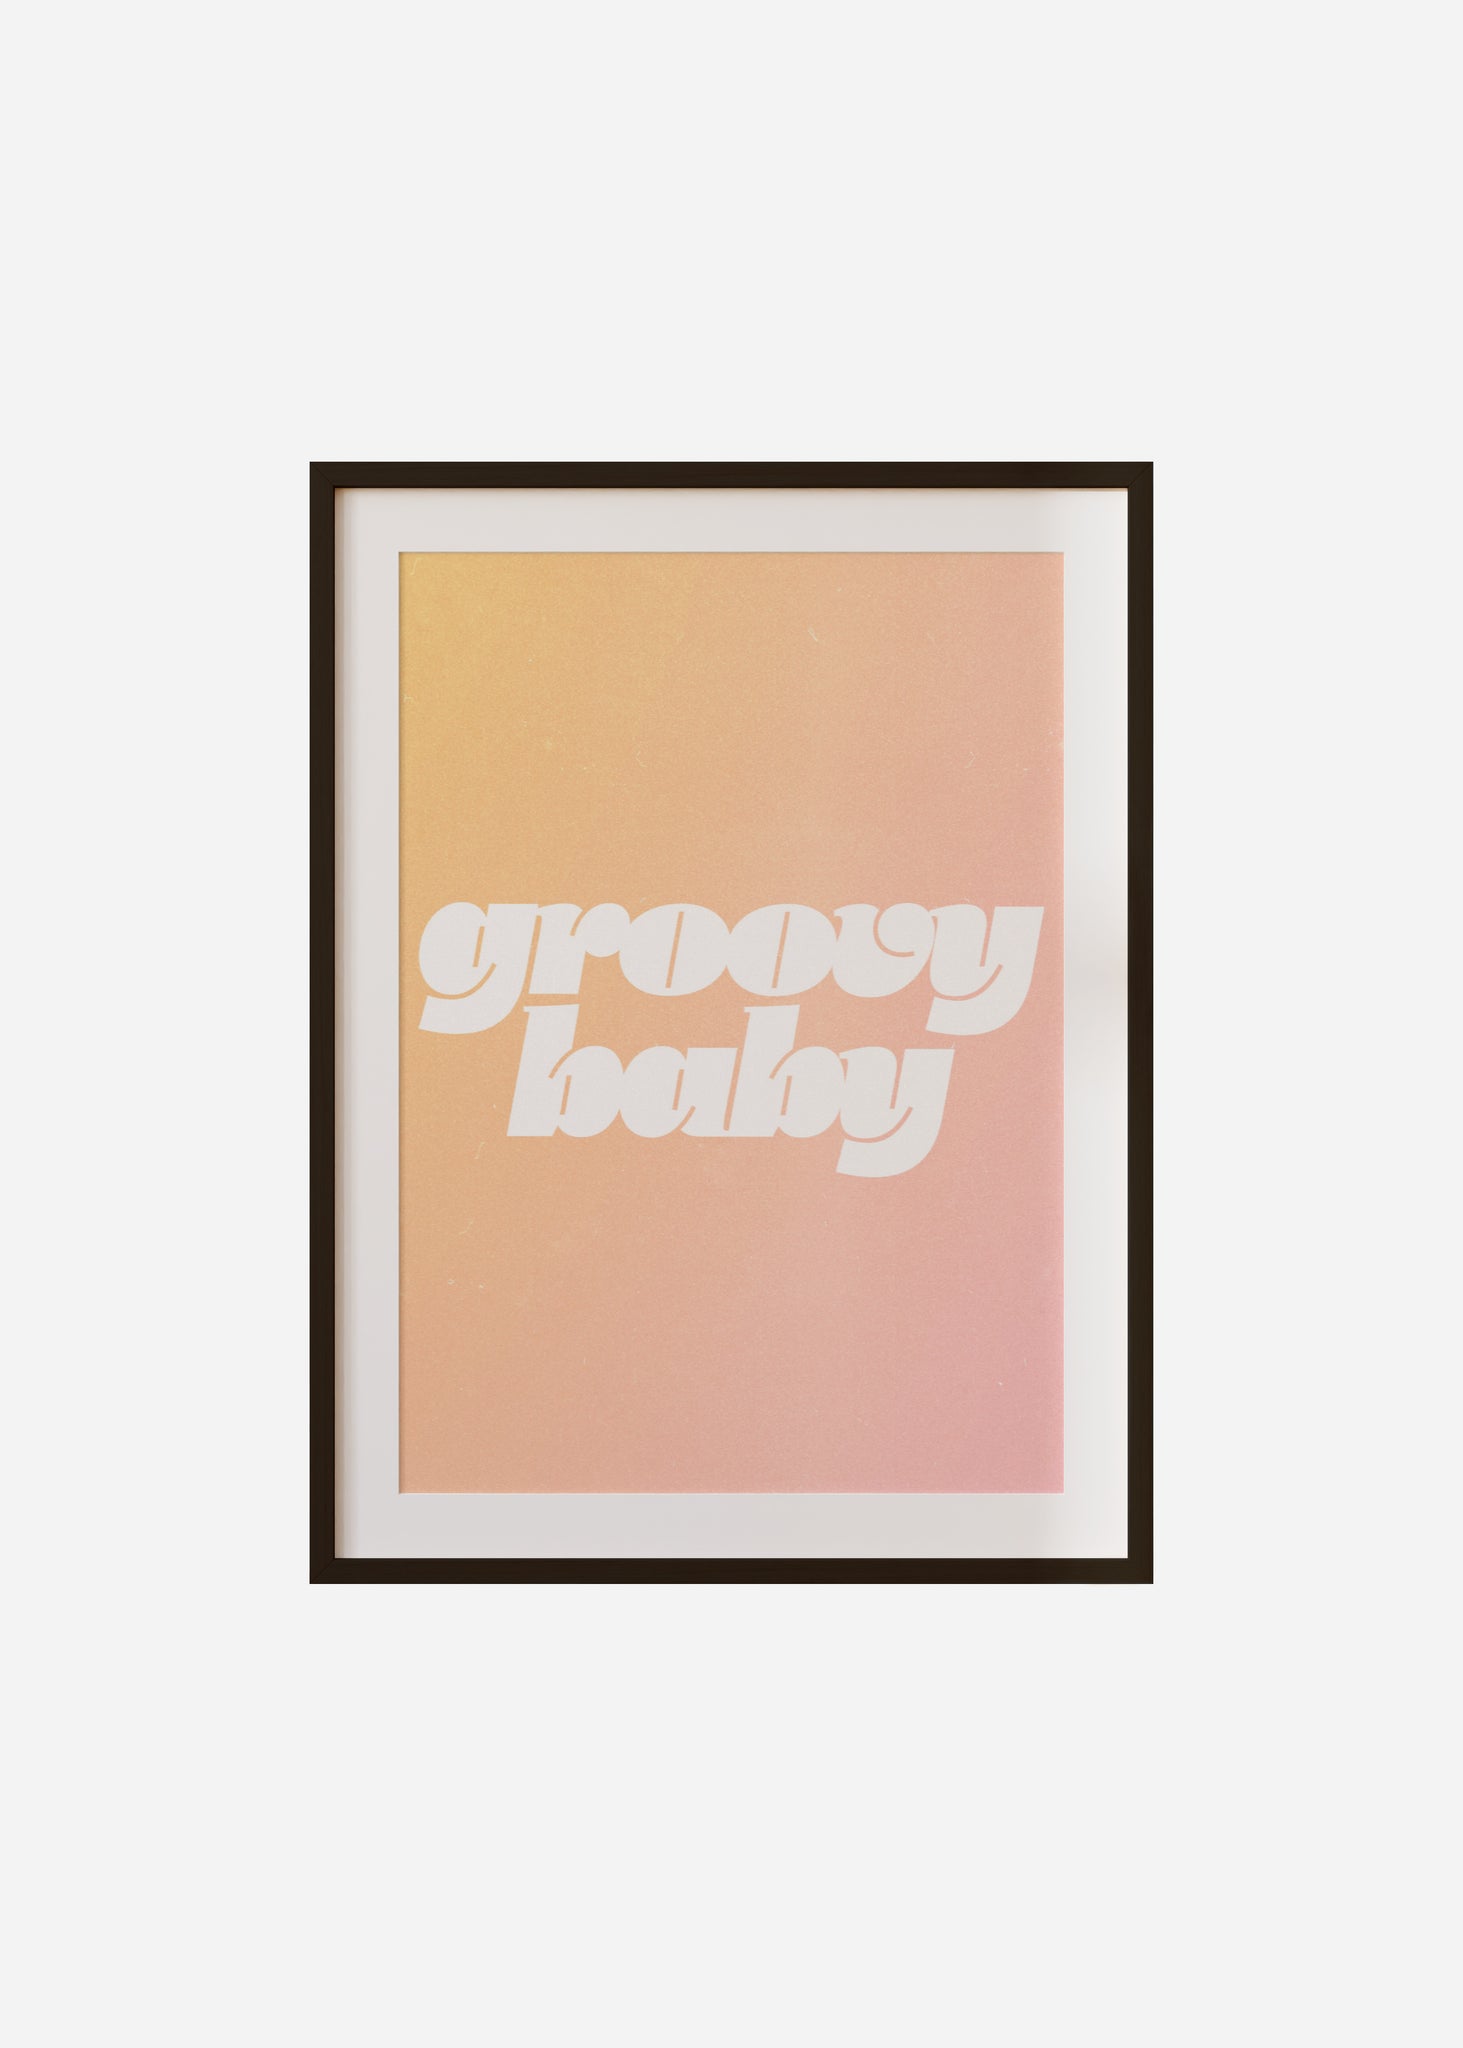 Groovy baby Framed & Mounted Print